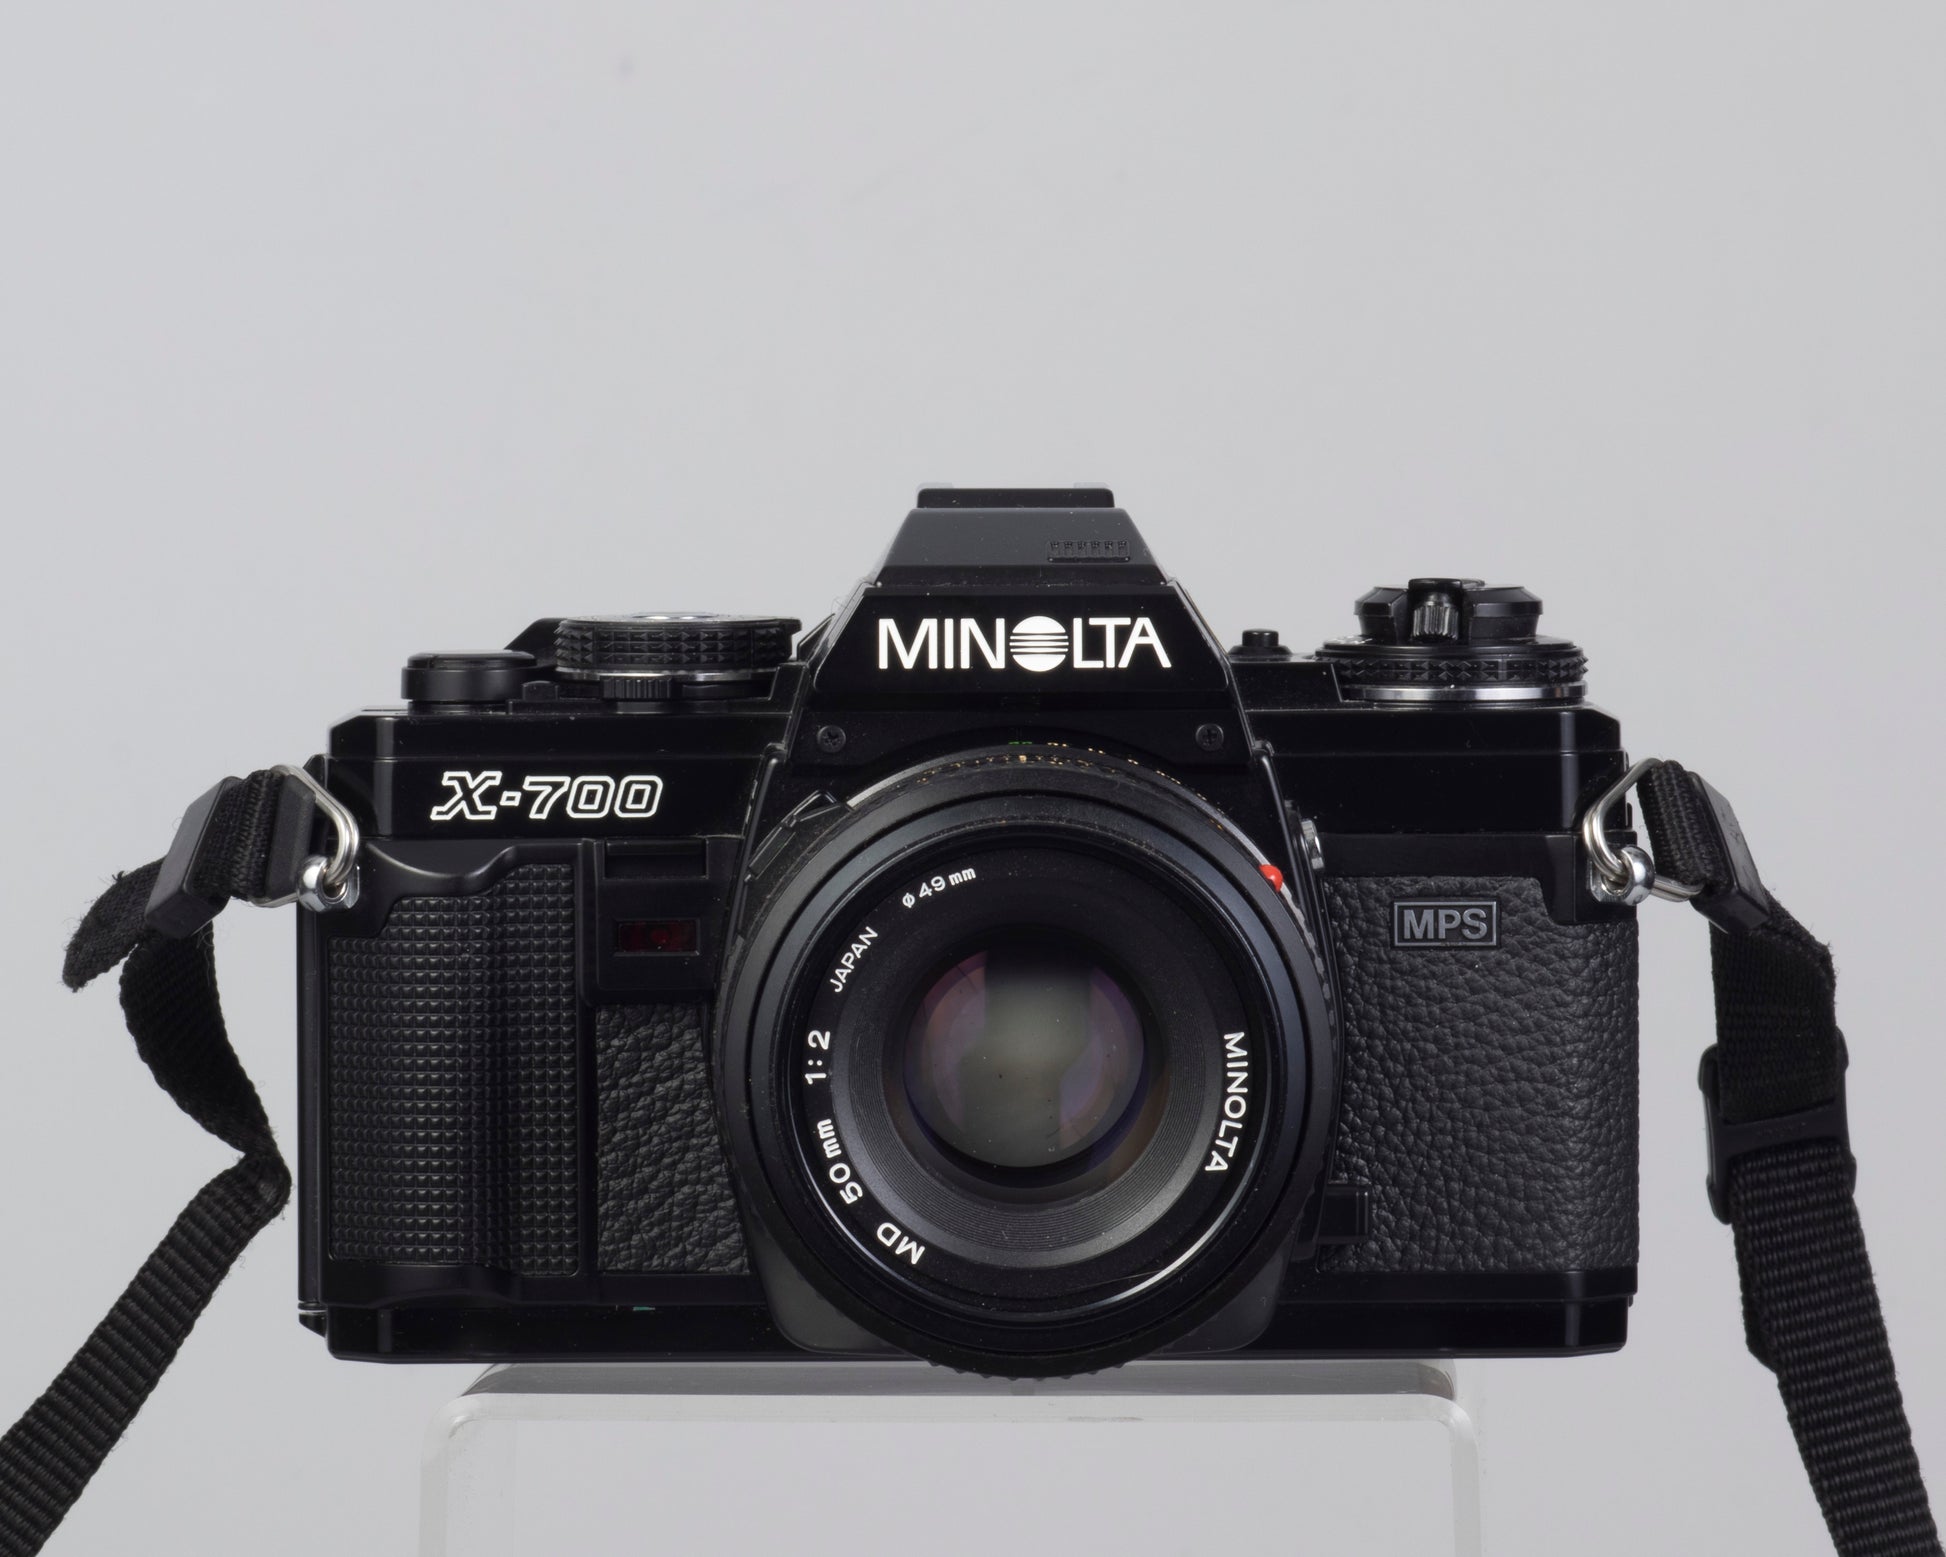 The Minolta X-700 is one of the all-time great manual focus 35mm film SLR cameras